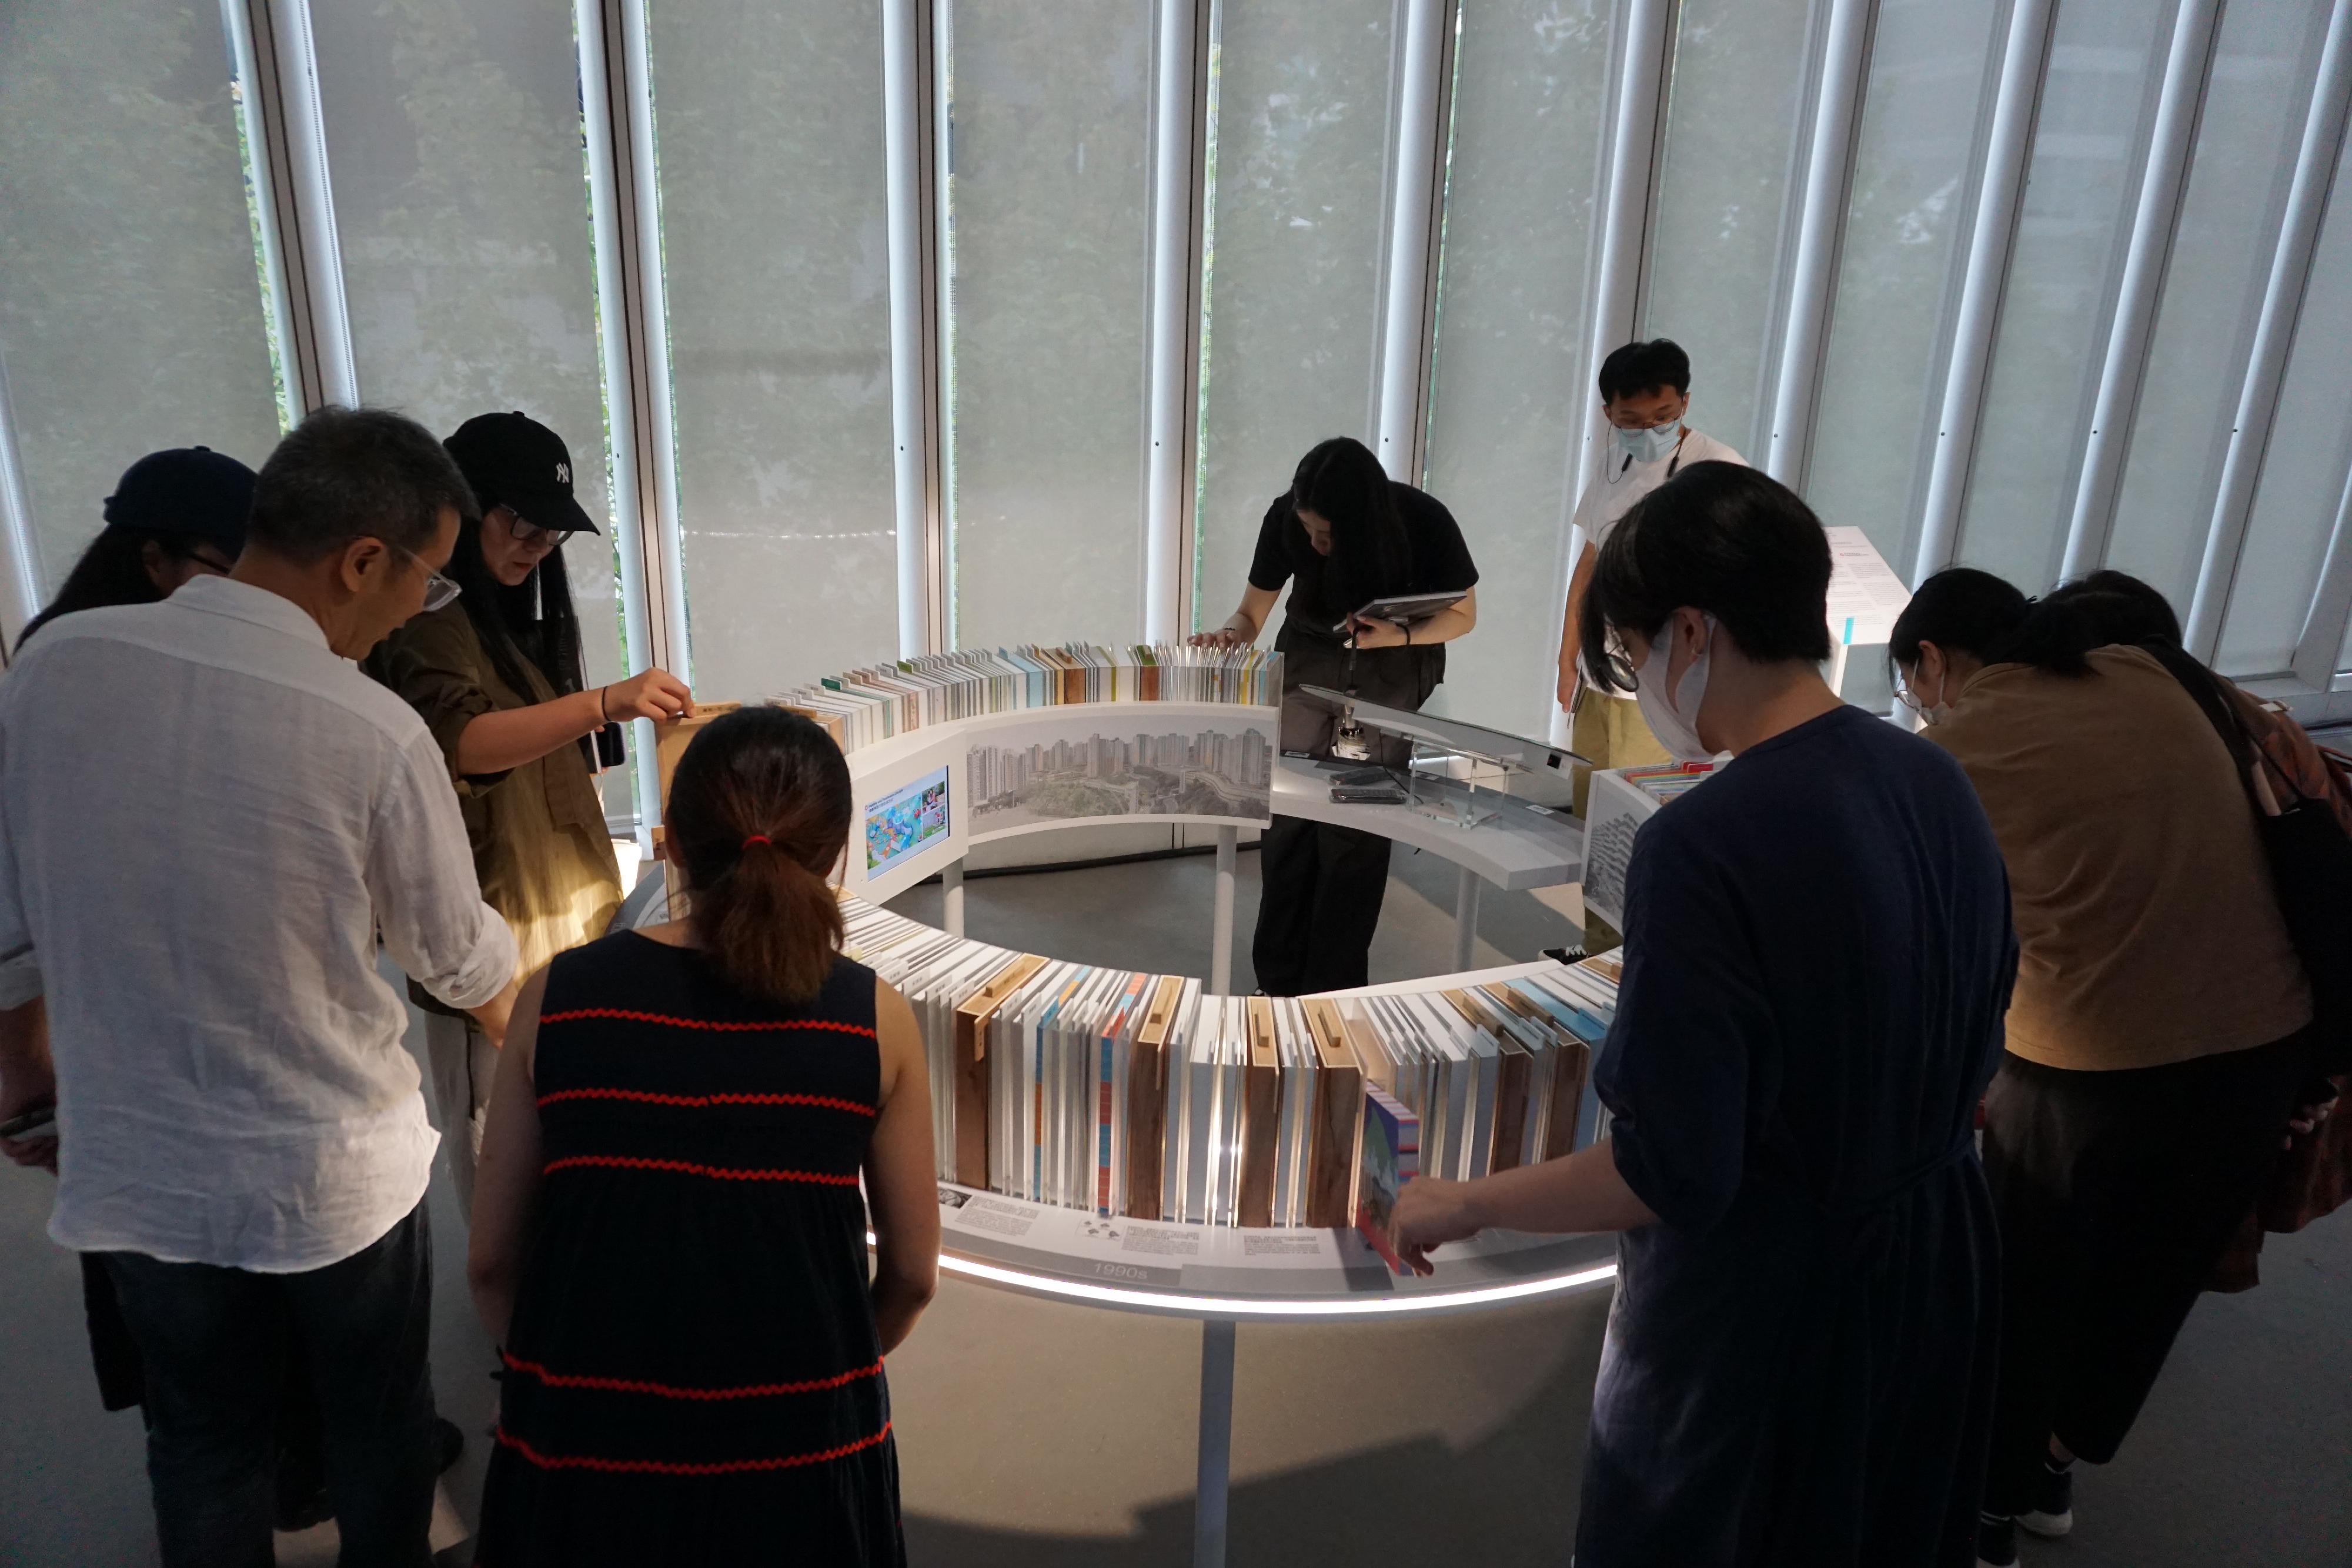 The Hong Kong Housing Authority (HA) is participating in the Urbanism and Architecture Exhibitions for Excellence titled "M3: Beyond Territories - Made. Make. Making" organised by the Hong Kong Institute of Architects. Photo shows the HA's exhibit "Housing for Millions".